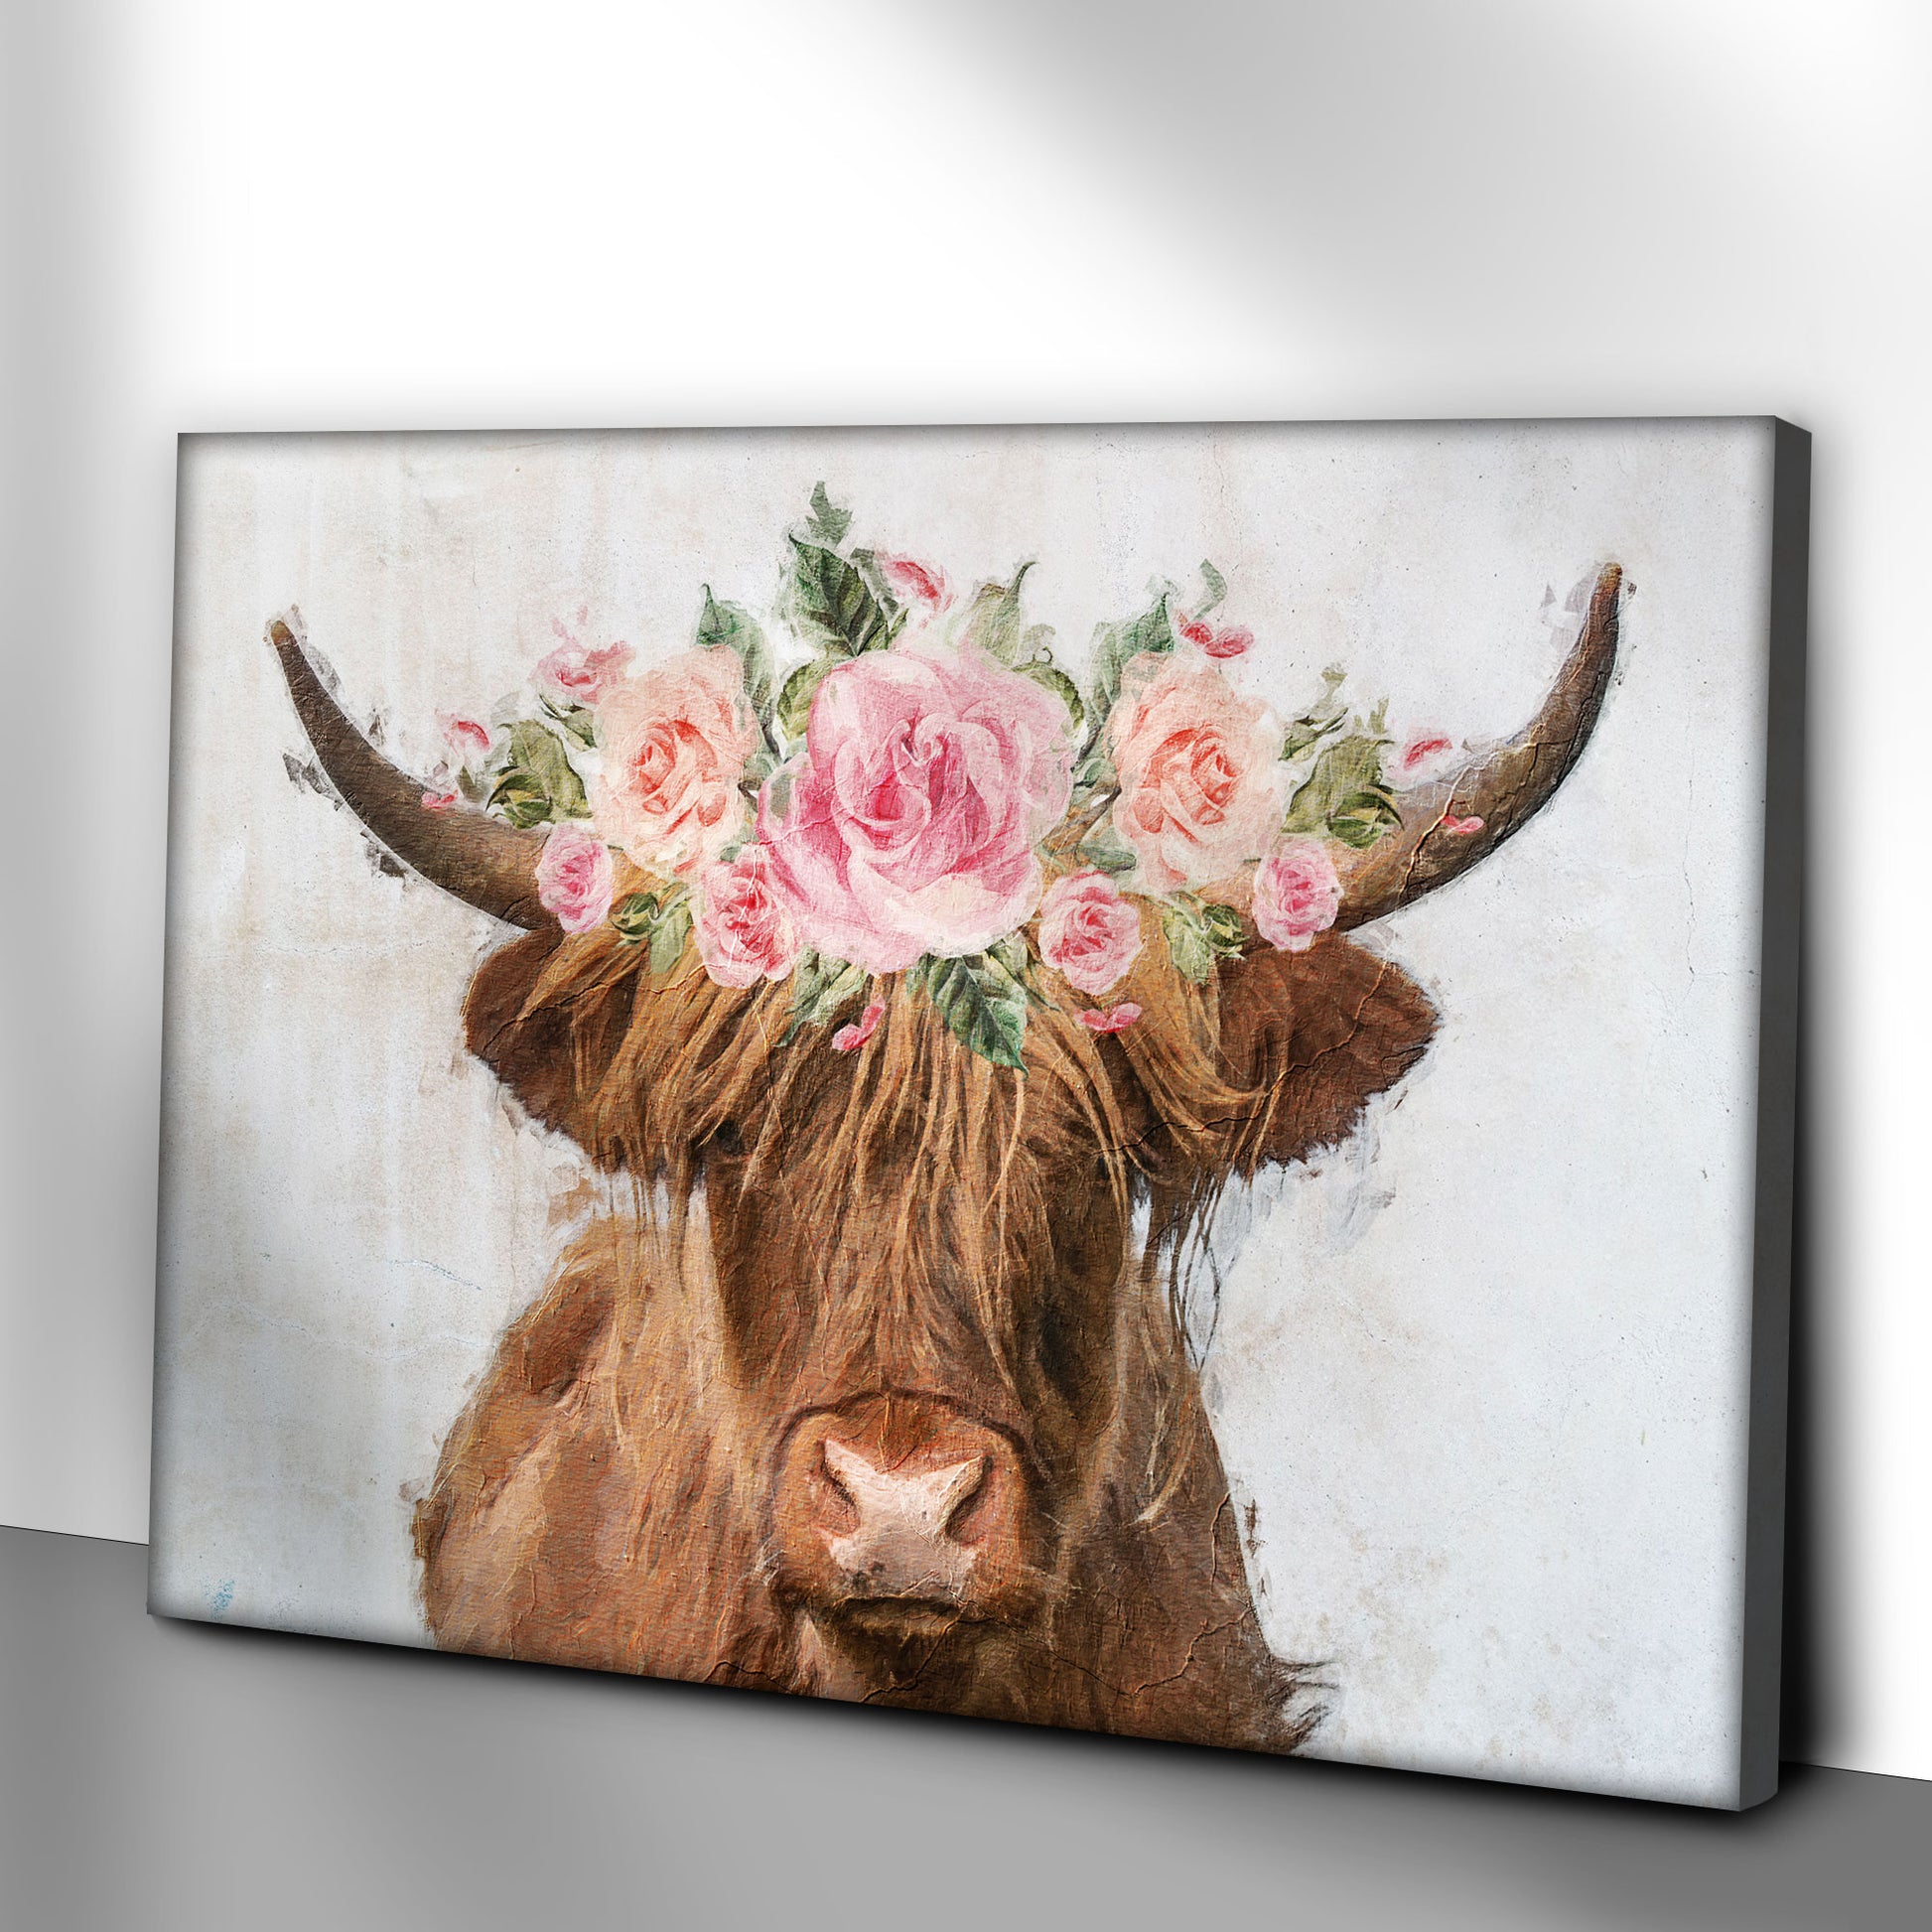 Highland Cow Floral Wreath Painting Canvas Wall Art Style 1 - Image by Tailored Canvases